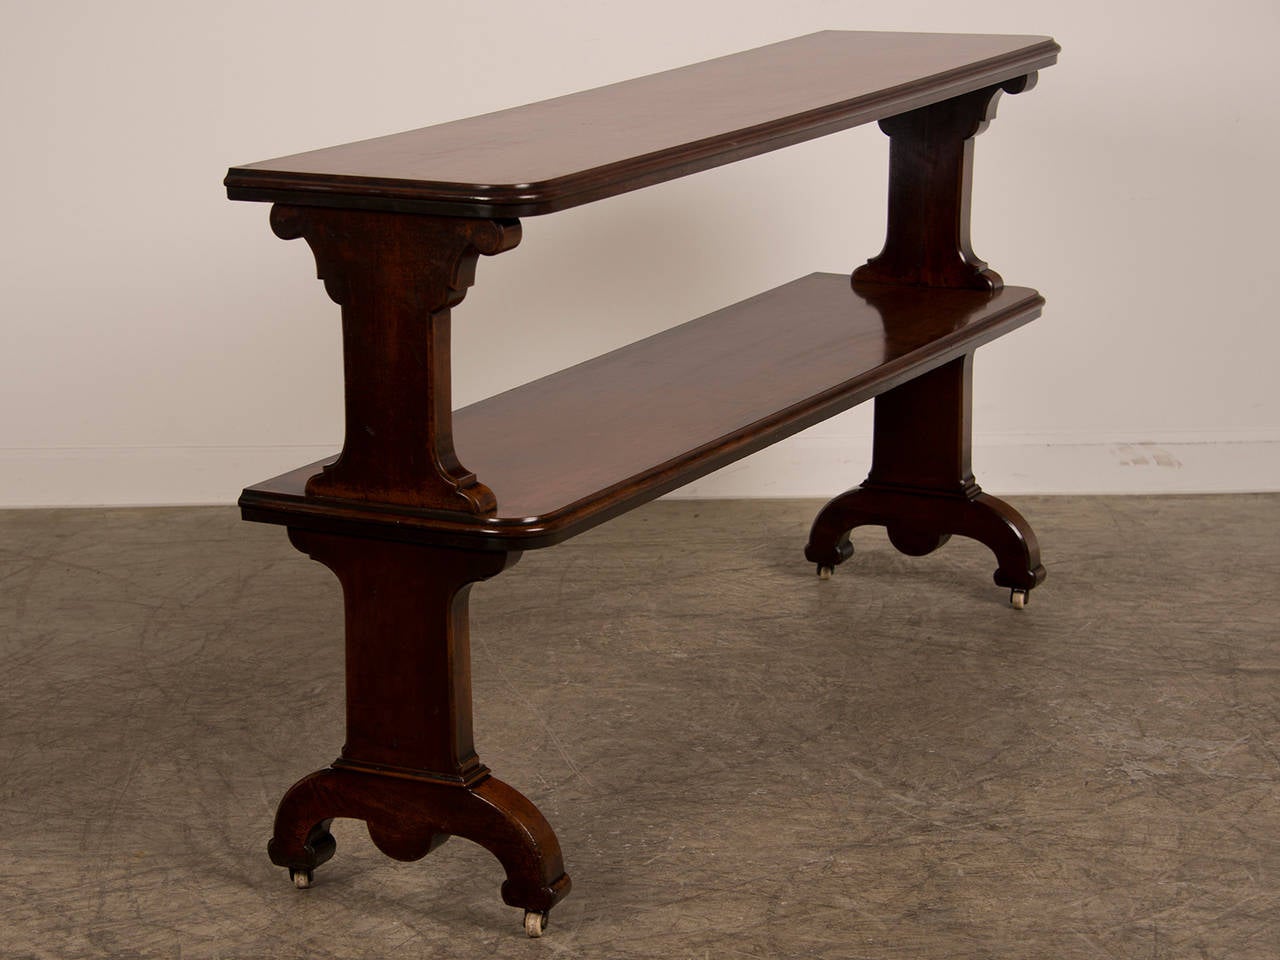 Receive our new selections direct from 1stdibs by email each week. Please click on “Follow Dealer” button below and see them first!

Antique Irish mahogany two shelf server, original casters, circa 1870. The bold scale and solid material on this